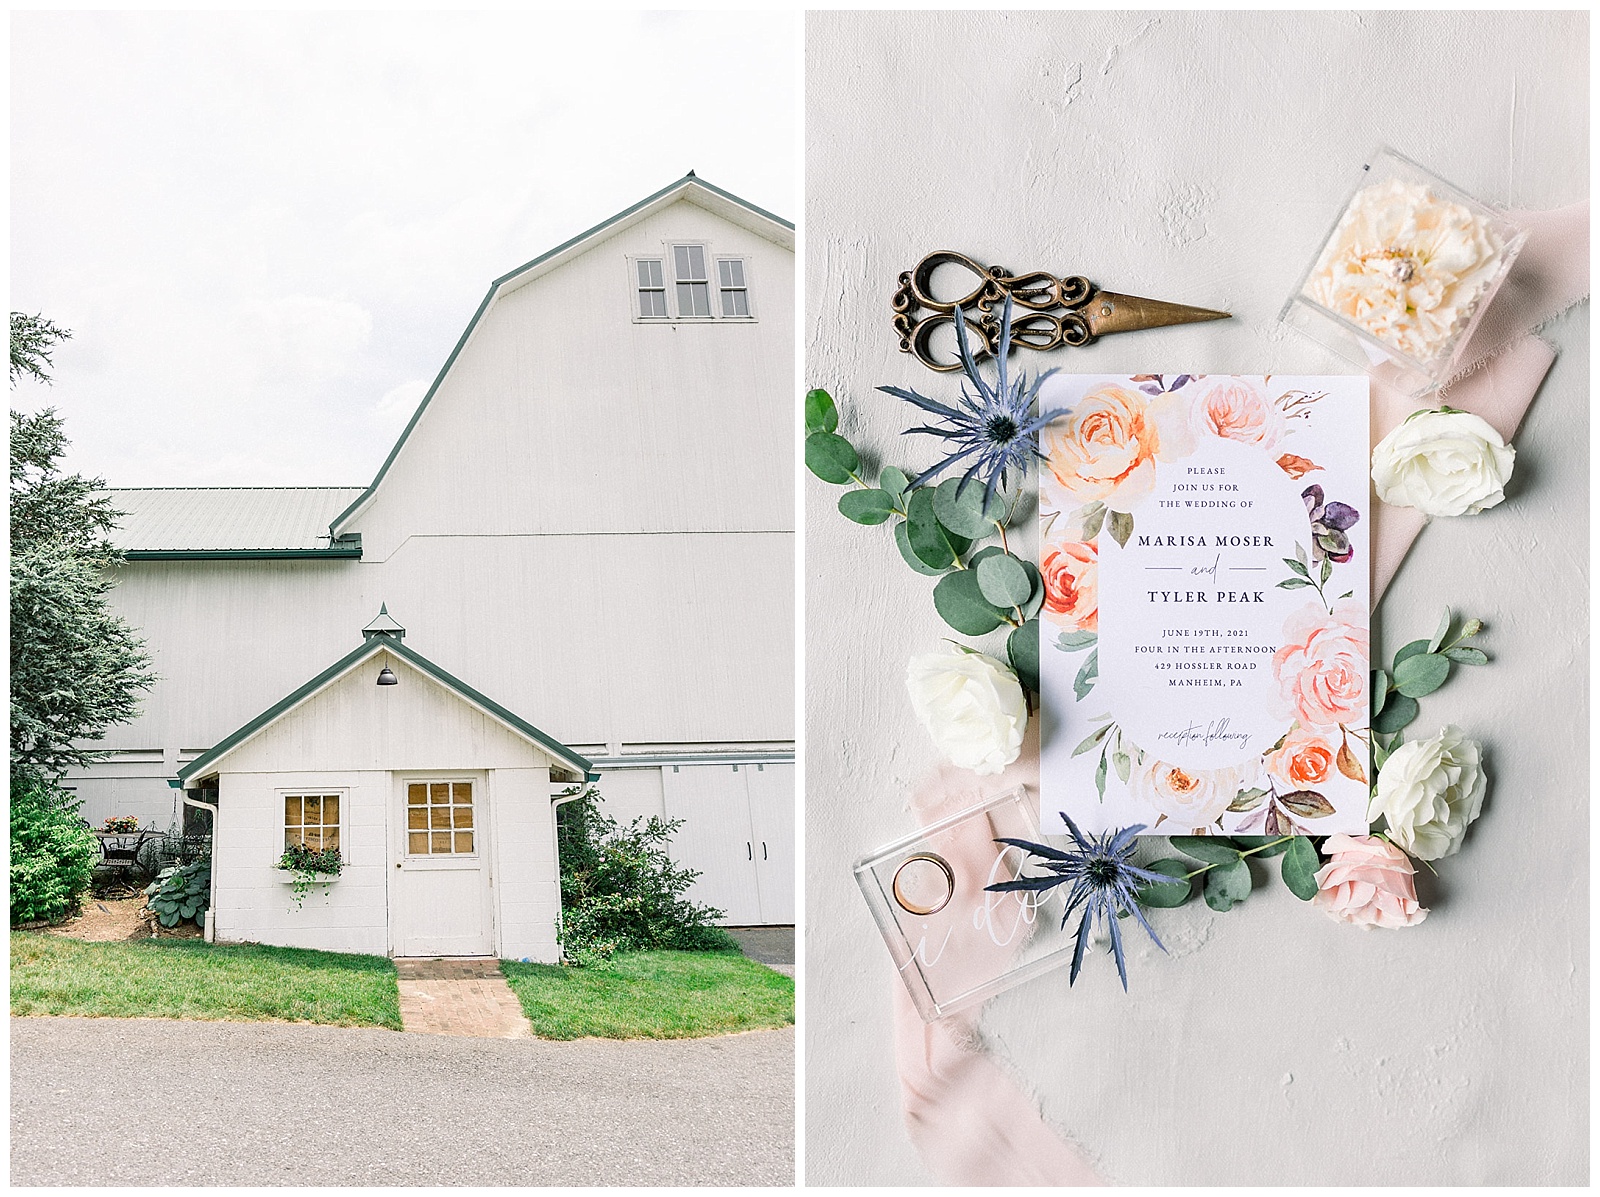 wedding details and exterior images of lakefield weddings, a modern barn wedding venue